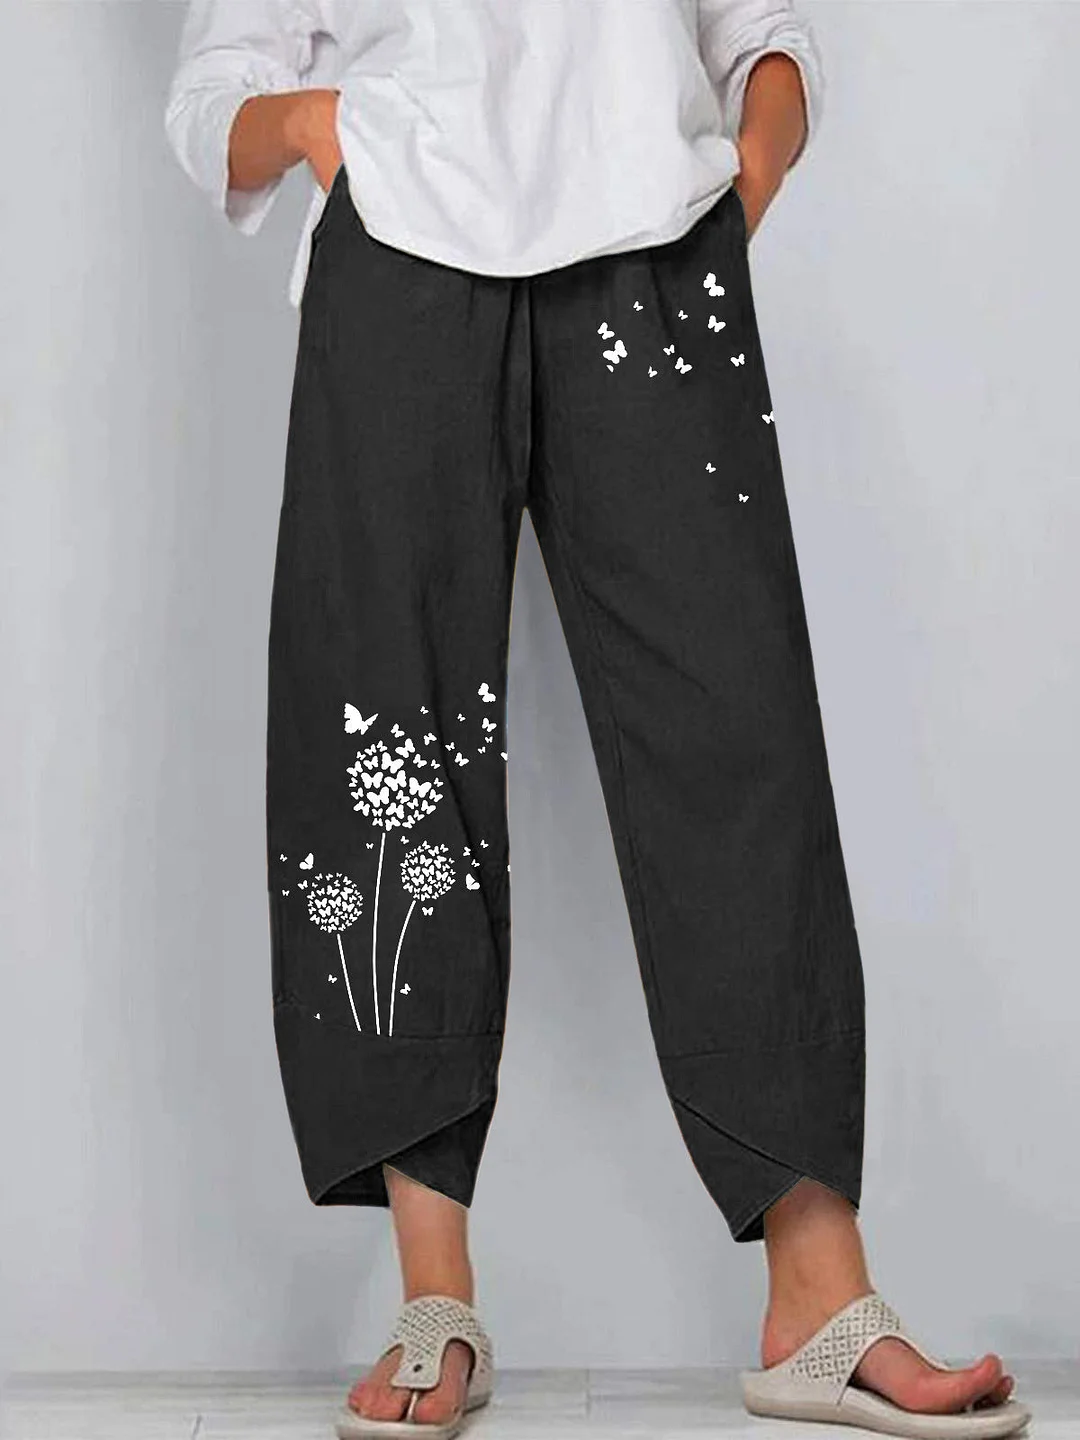 Women plus size clothing Women's Summer Casual Loose Graphic Printed Wide Leg Pants Casual Pants-Nordswear